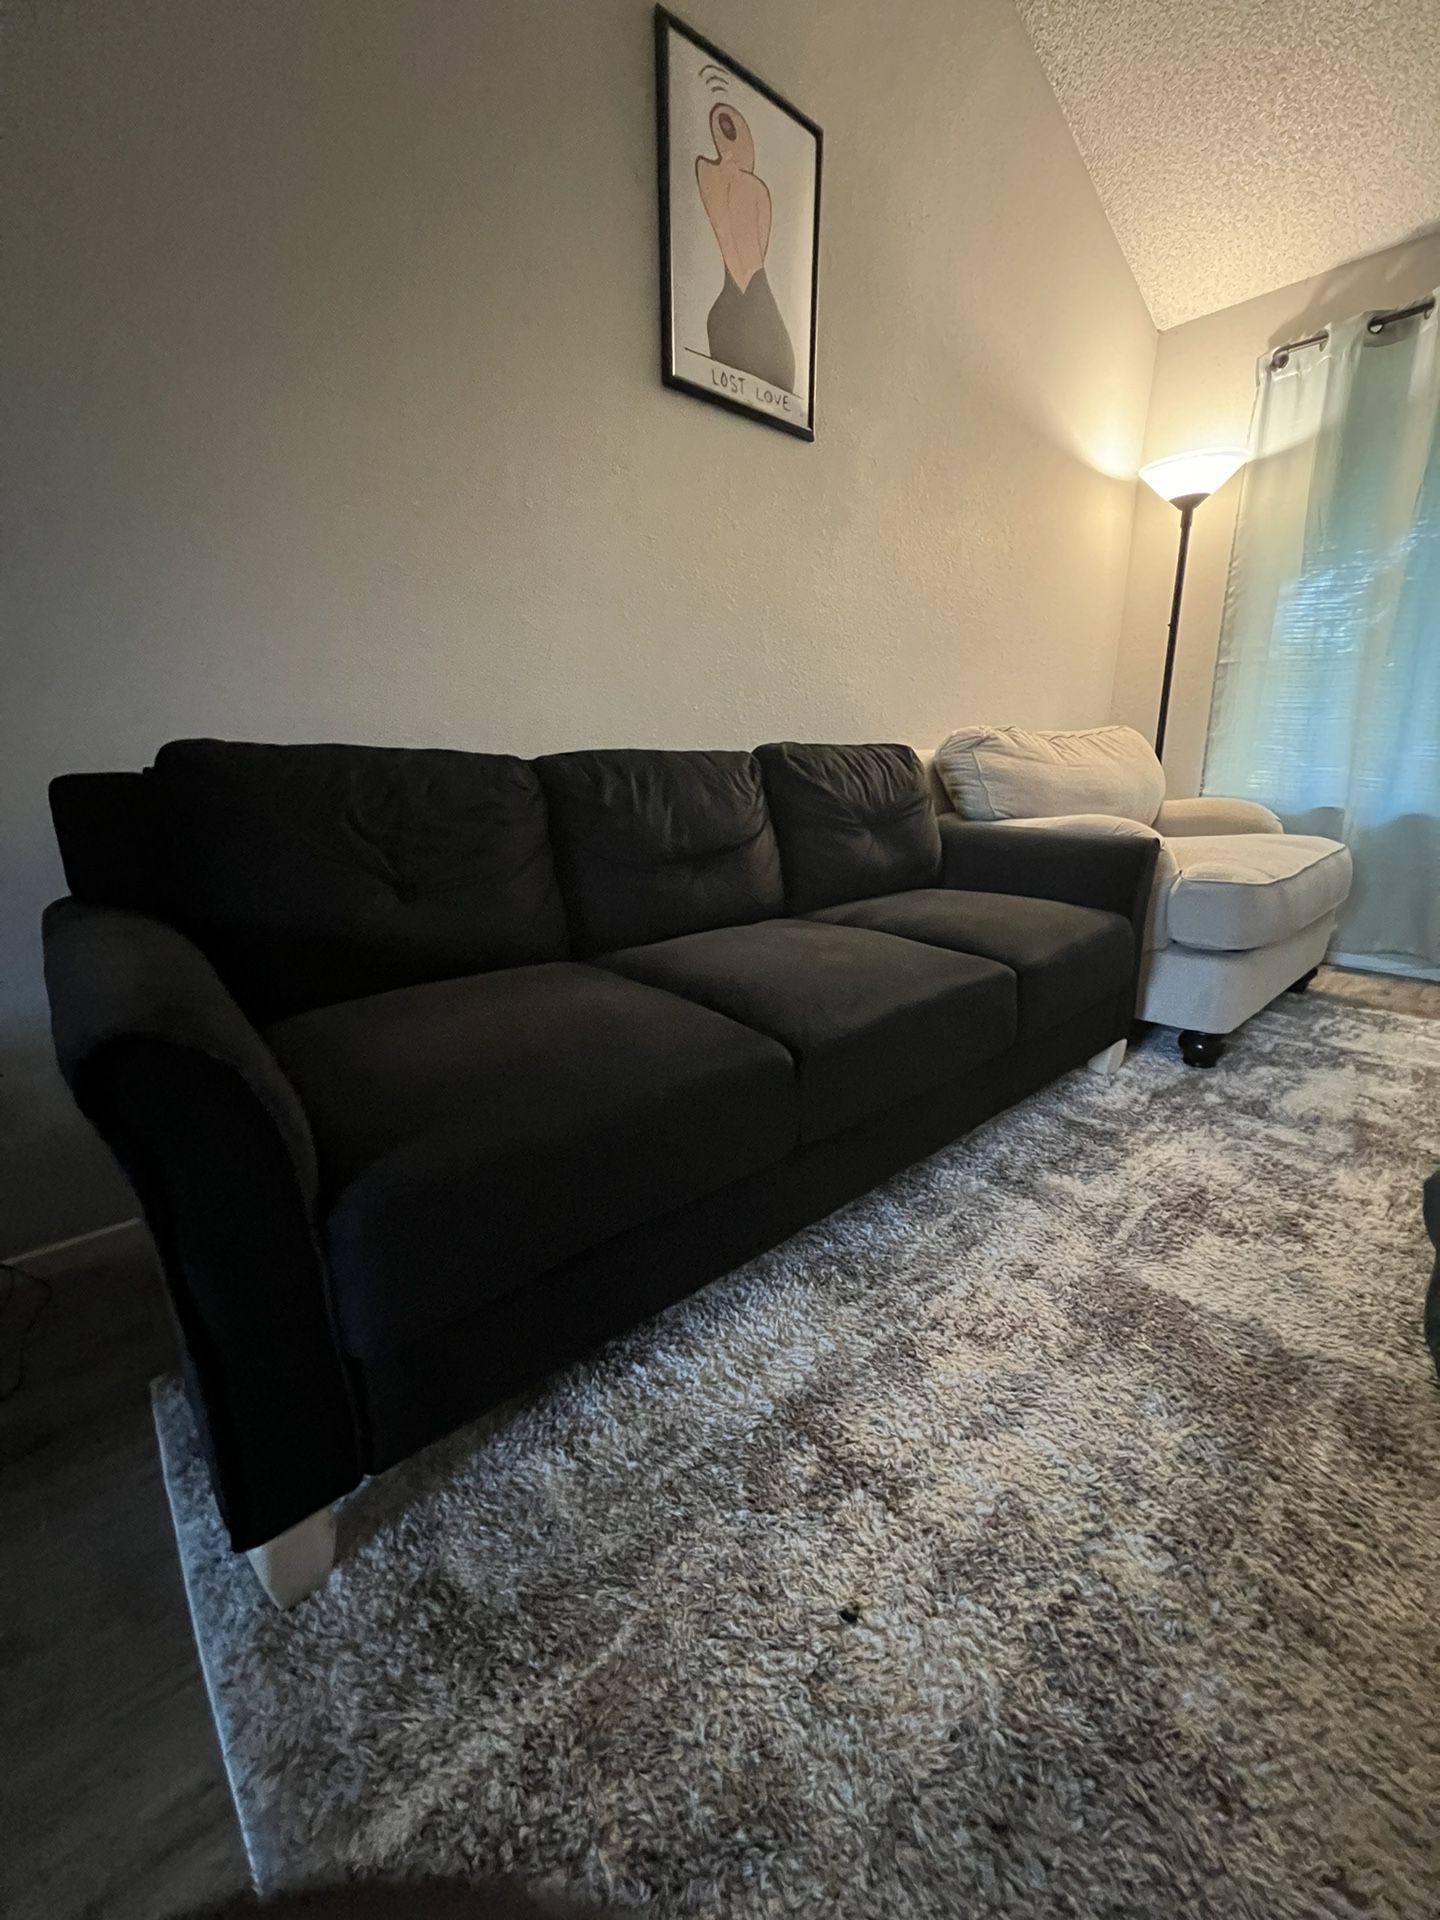 Good Condition Small Couch And Love Seat